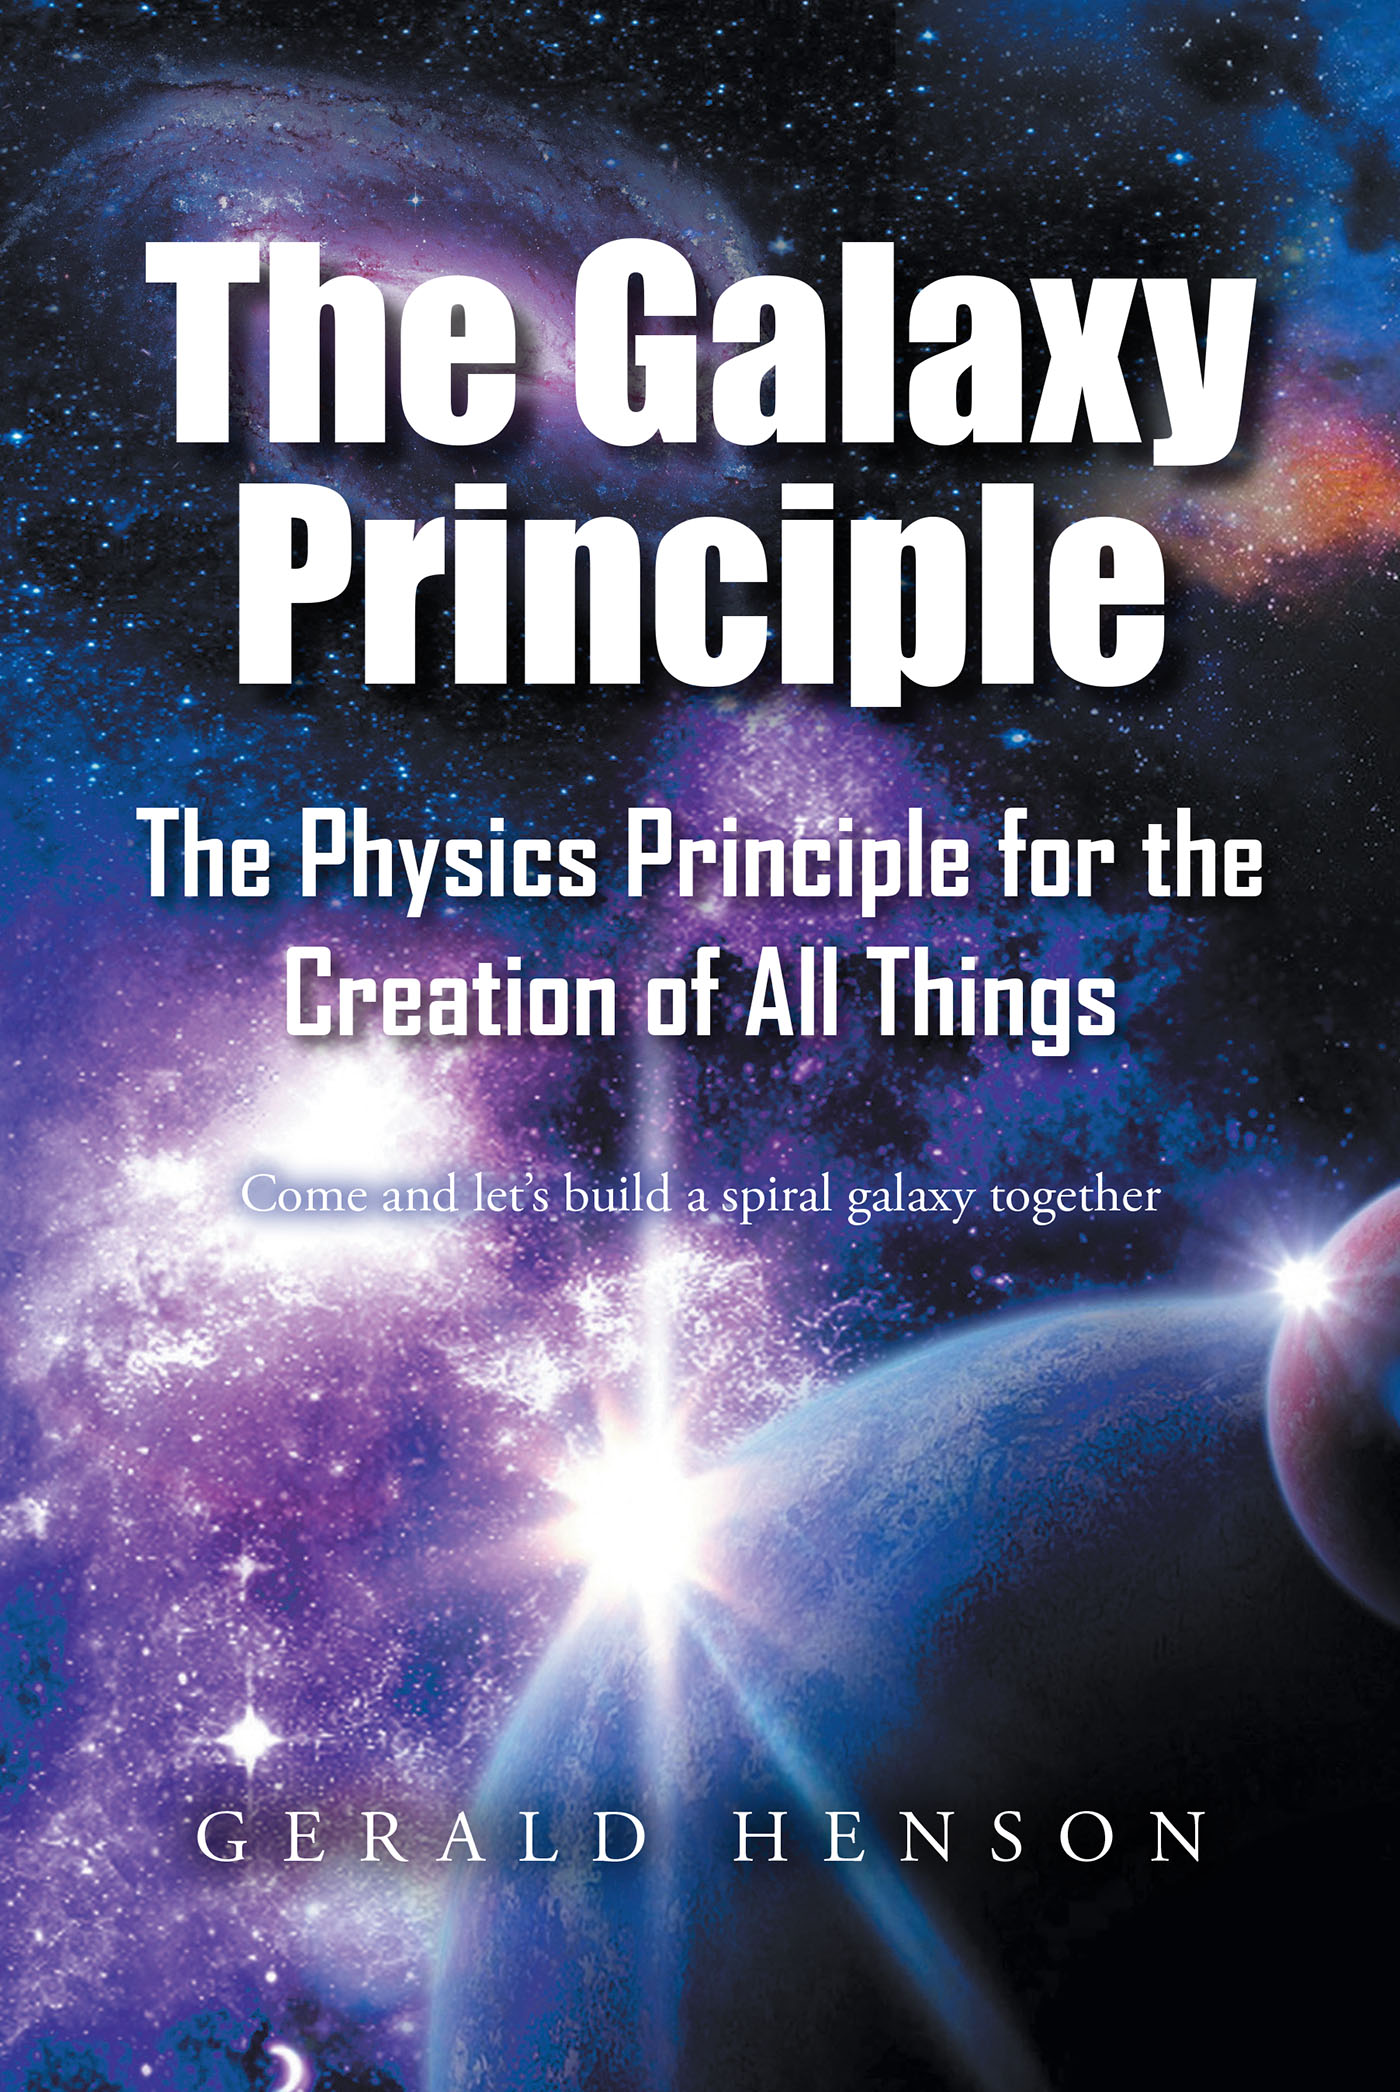 Gerald Henson’s Newly Released "The Galaxy Principle" is a Scholarly Discussion of the Author’s Research Into the Creation of the Galaxies